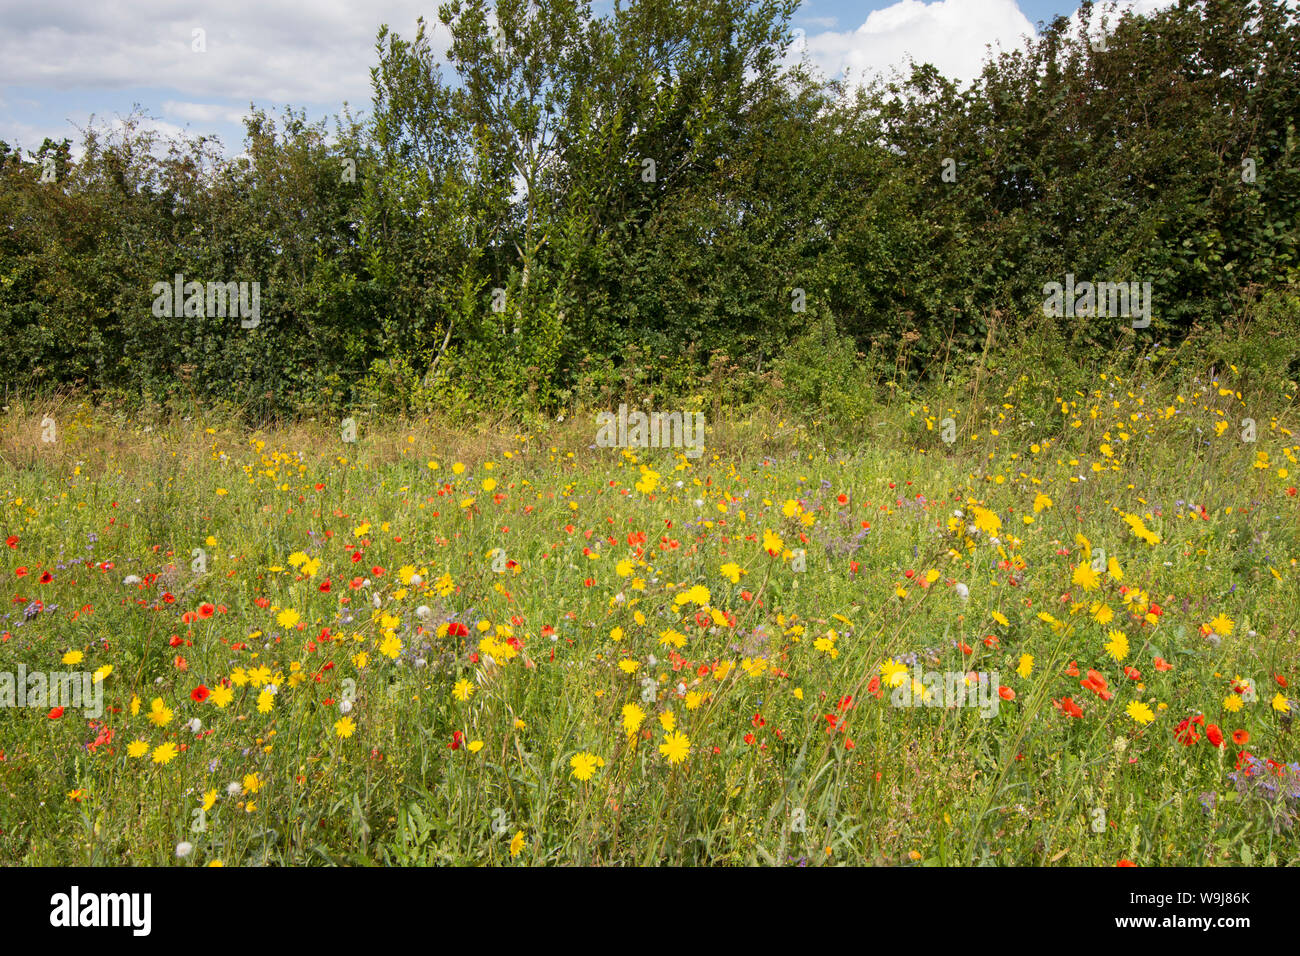 Wild flowers left at field margin to encourage wildlife and insects, on the South Downs, flowers are Sow-thistle, Poppies,  Borage, Blue tansy, UK Stock Photo